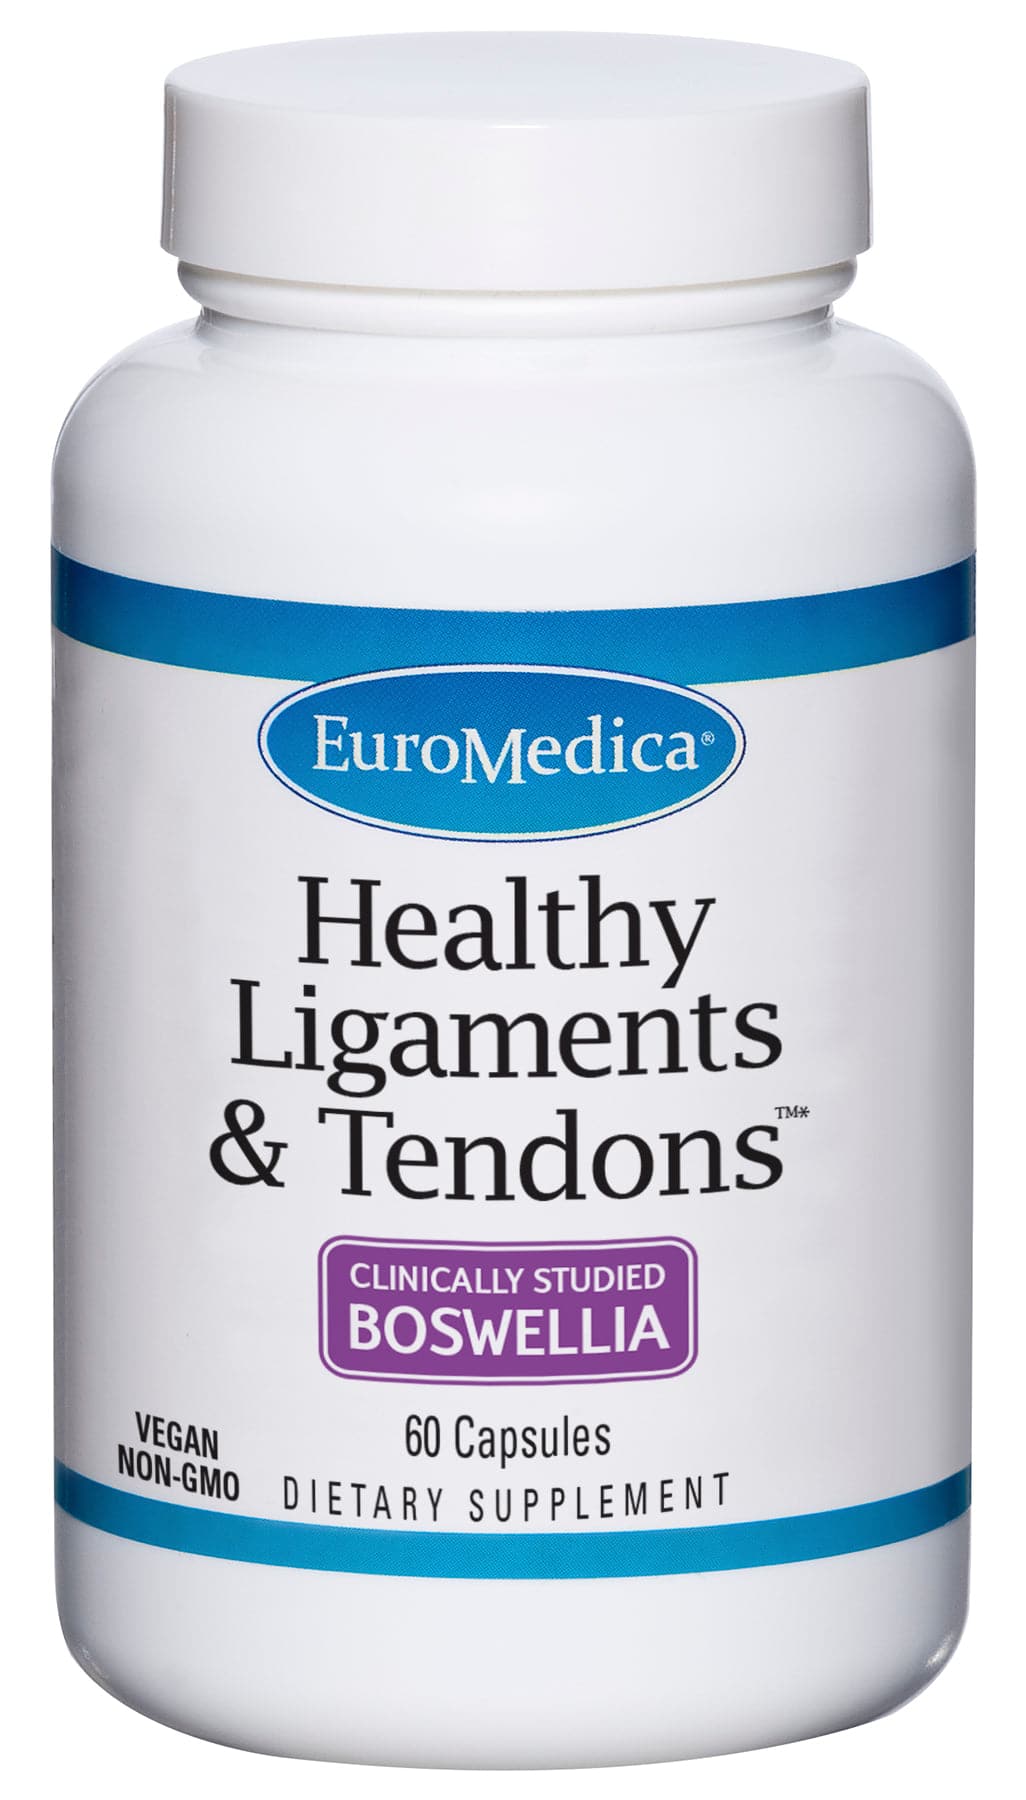 EuroMedica Healthy Ligaments & Tendons